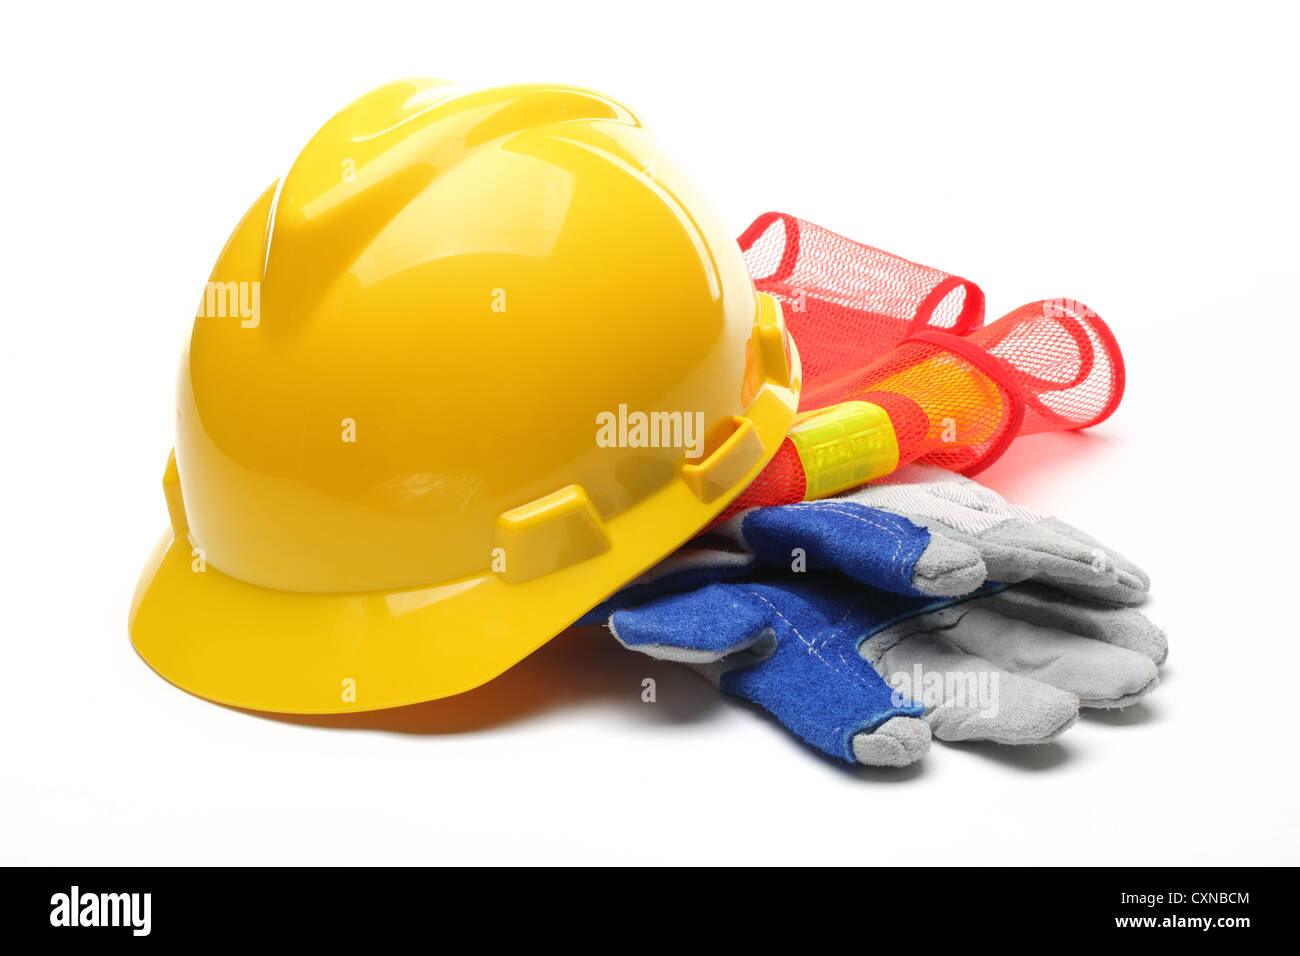 Safety gear kit isolated on white. Stock Photo